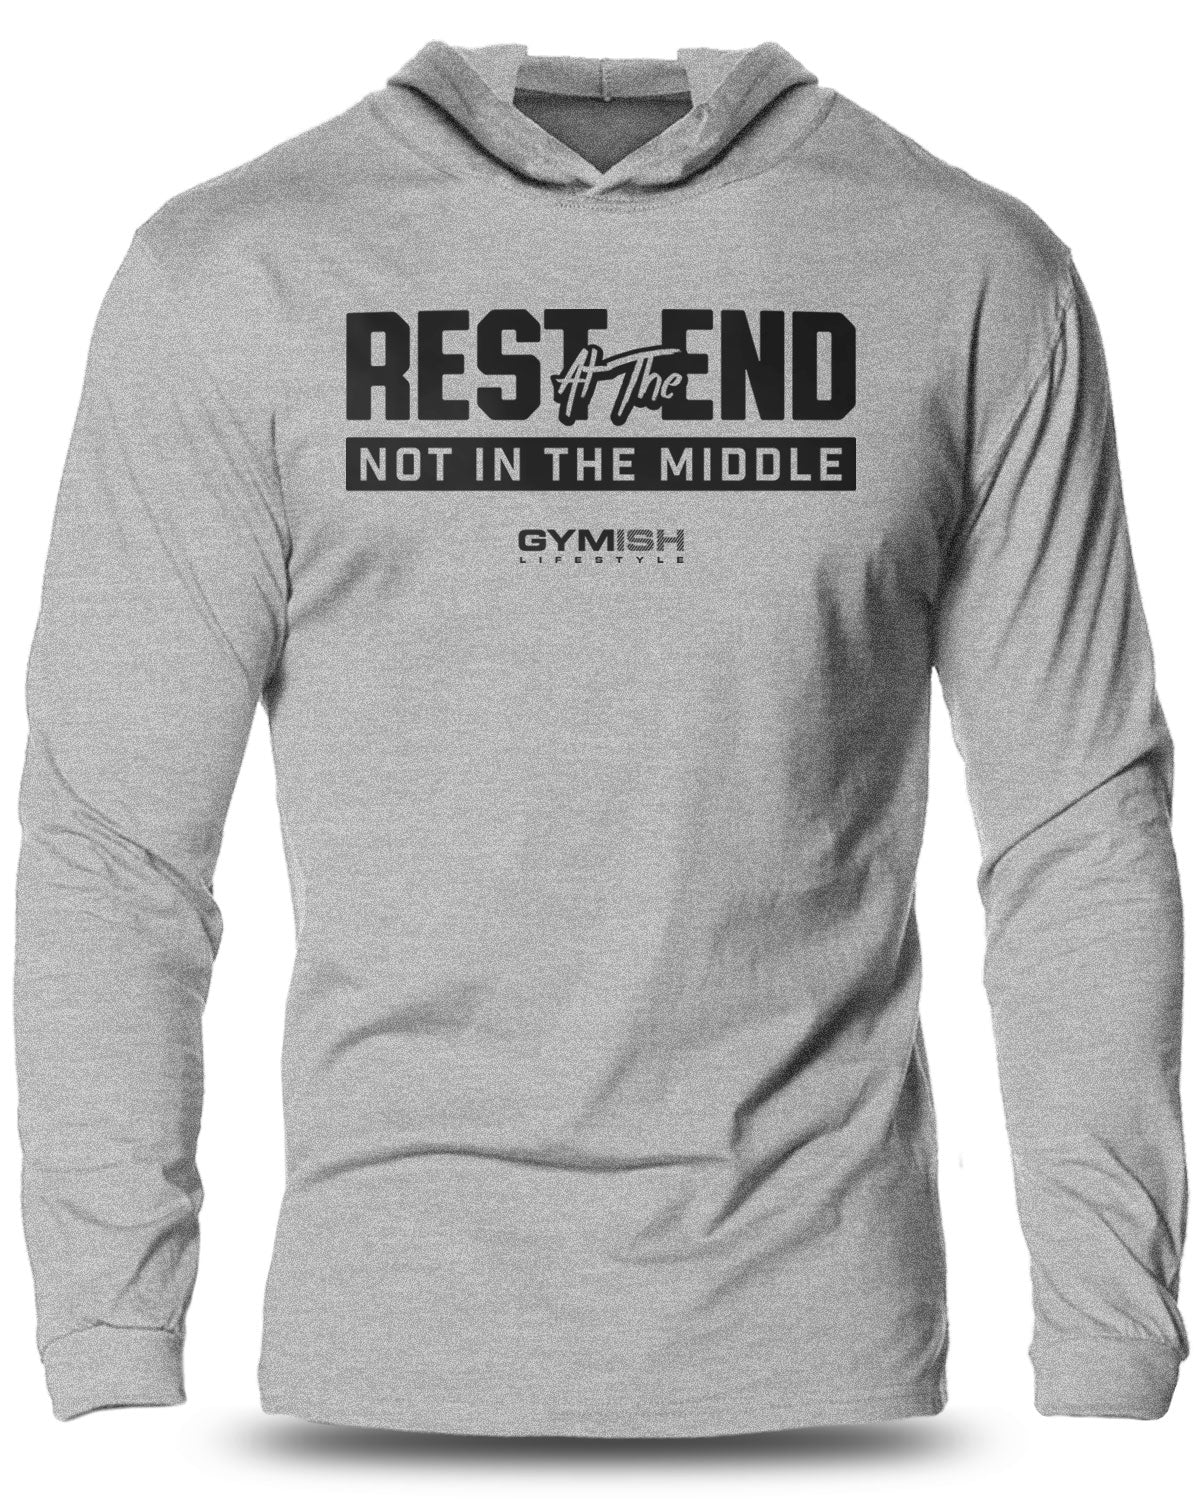 087- Rest At The End Lightweight Long Sleeve Hooded T-shirt for Men